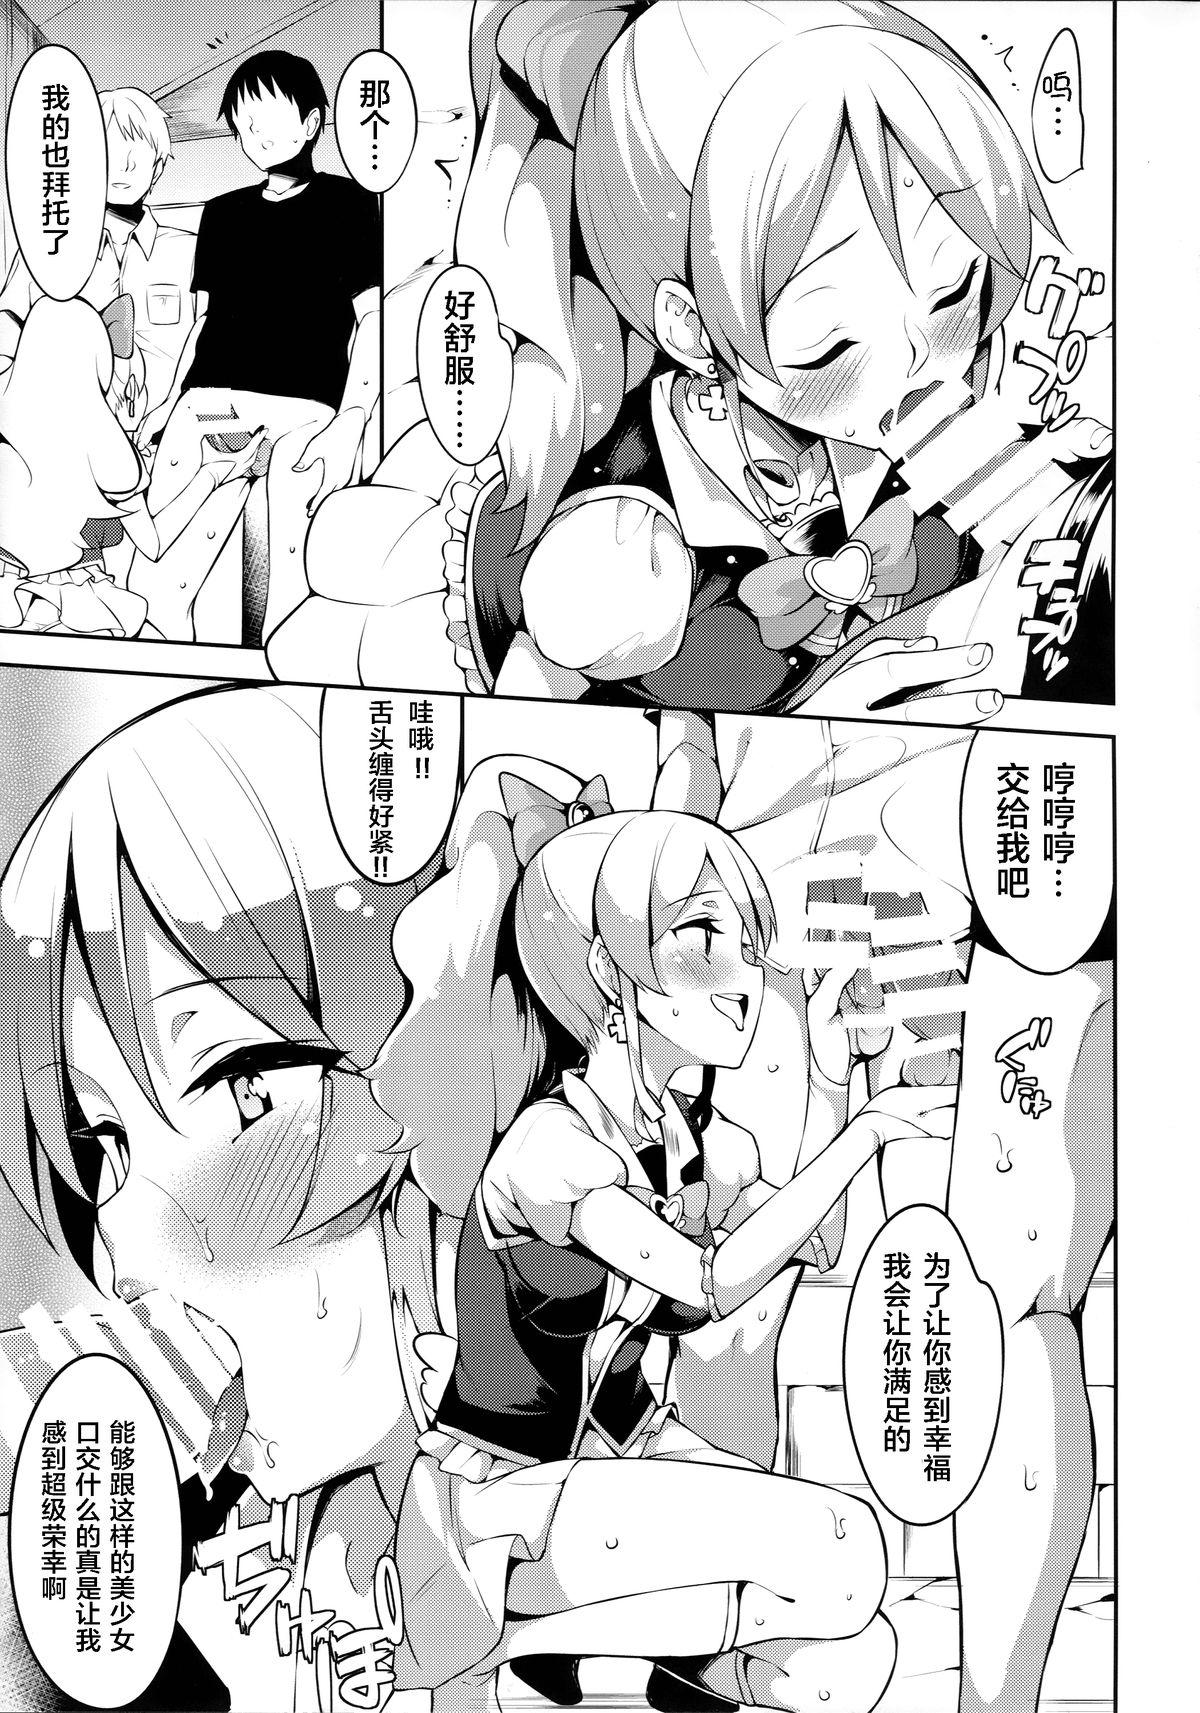 (CT25) [Garimpeiro (Mame Denkyuu)] Shiawase Oomori Delivery (HappinessCharge PreCure!) [Chinese] [CE汉化组] page 8 full